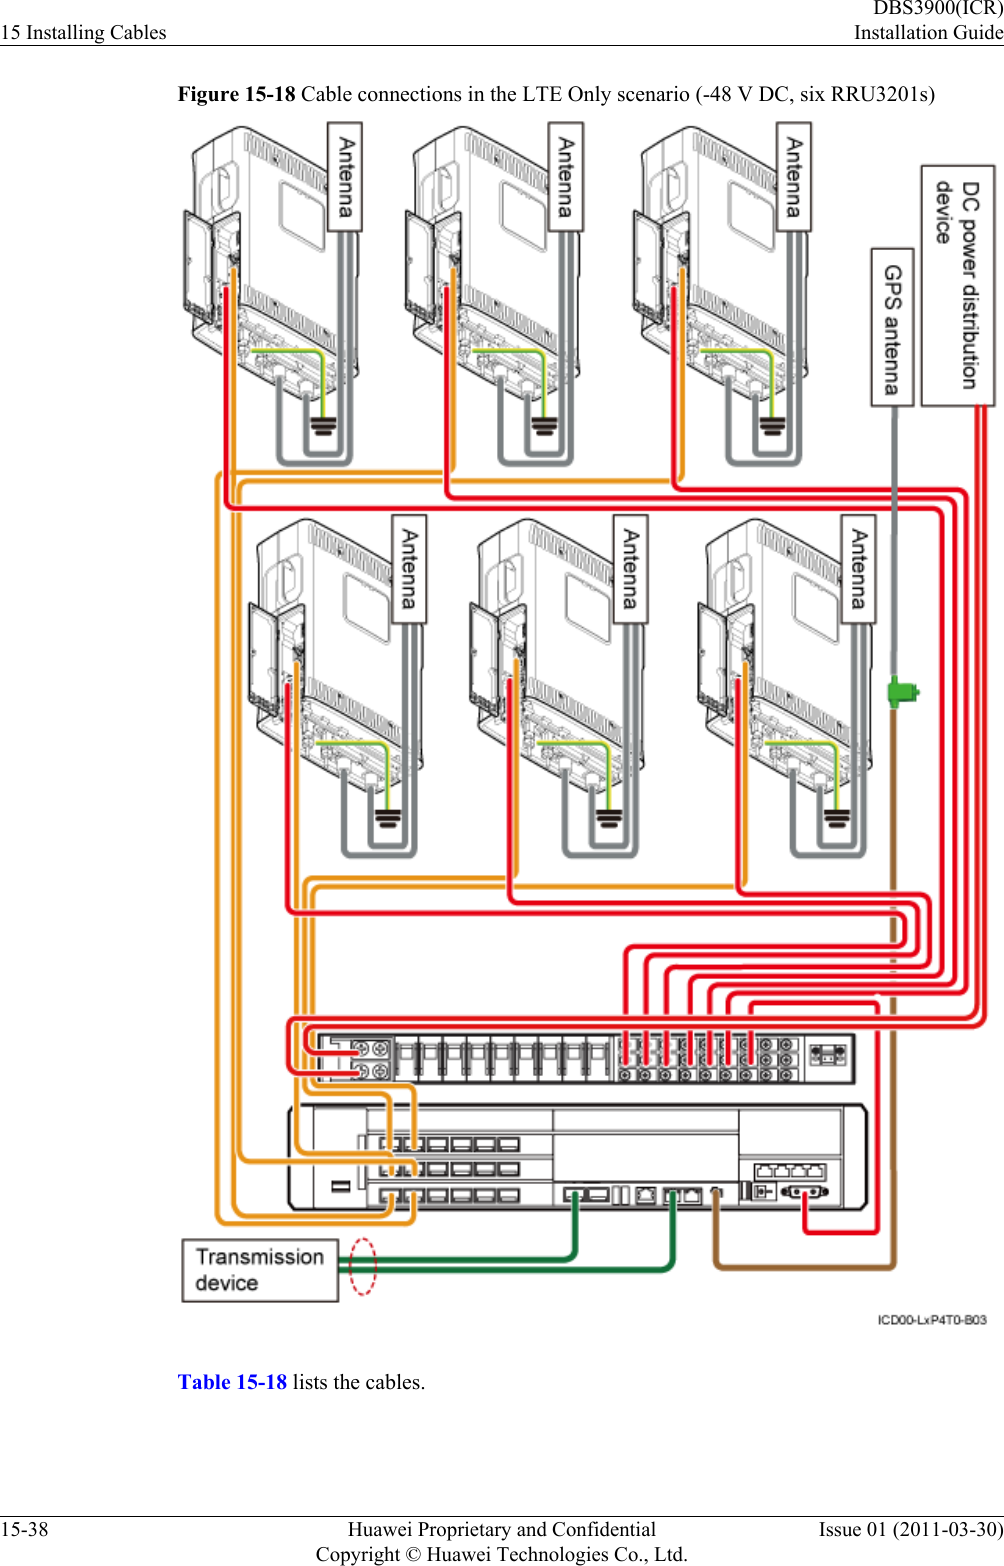 Figure 15-18 Cable connections in the LTE Only scenario (-48 V DC, six RRU3201s)Table 15-18 lists the cables.15 Installing CablesDBS3900(ICR)Installation Guide15-38 Huawei Proprietary and ConfidentialCopyright © Huawei Technologies Co., Ltd.Issue 01 (2011-03-30)